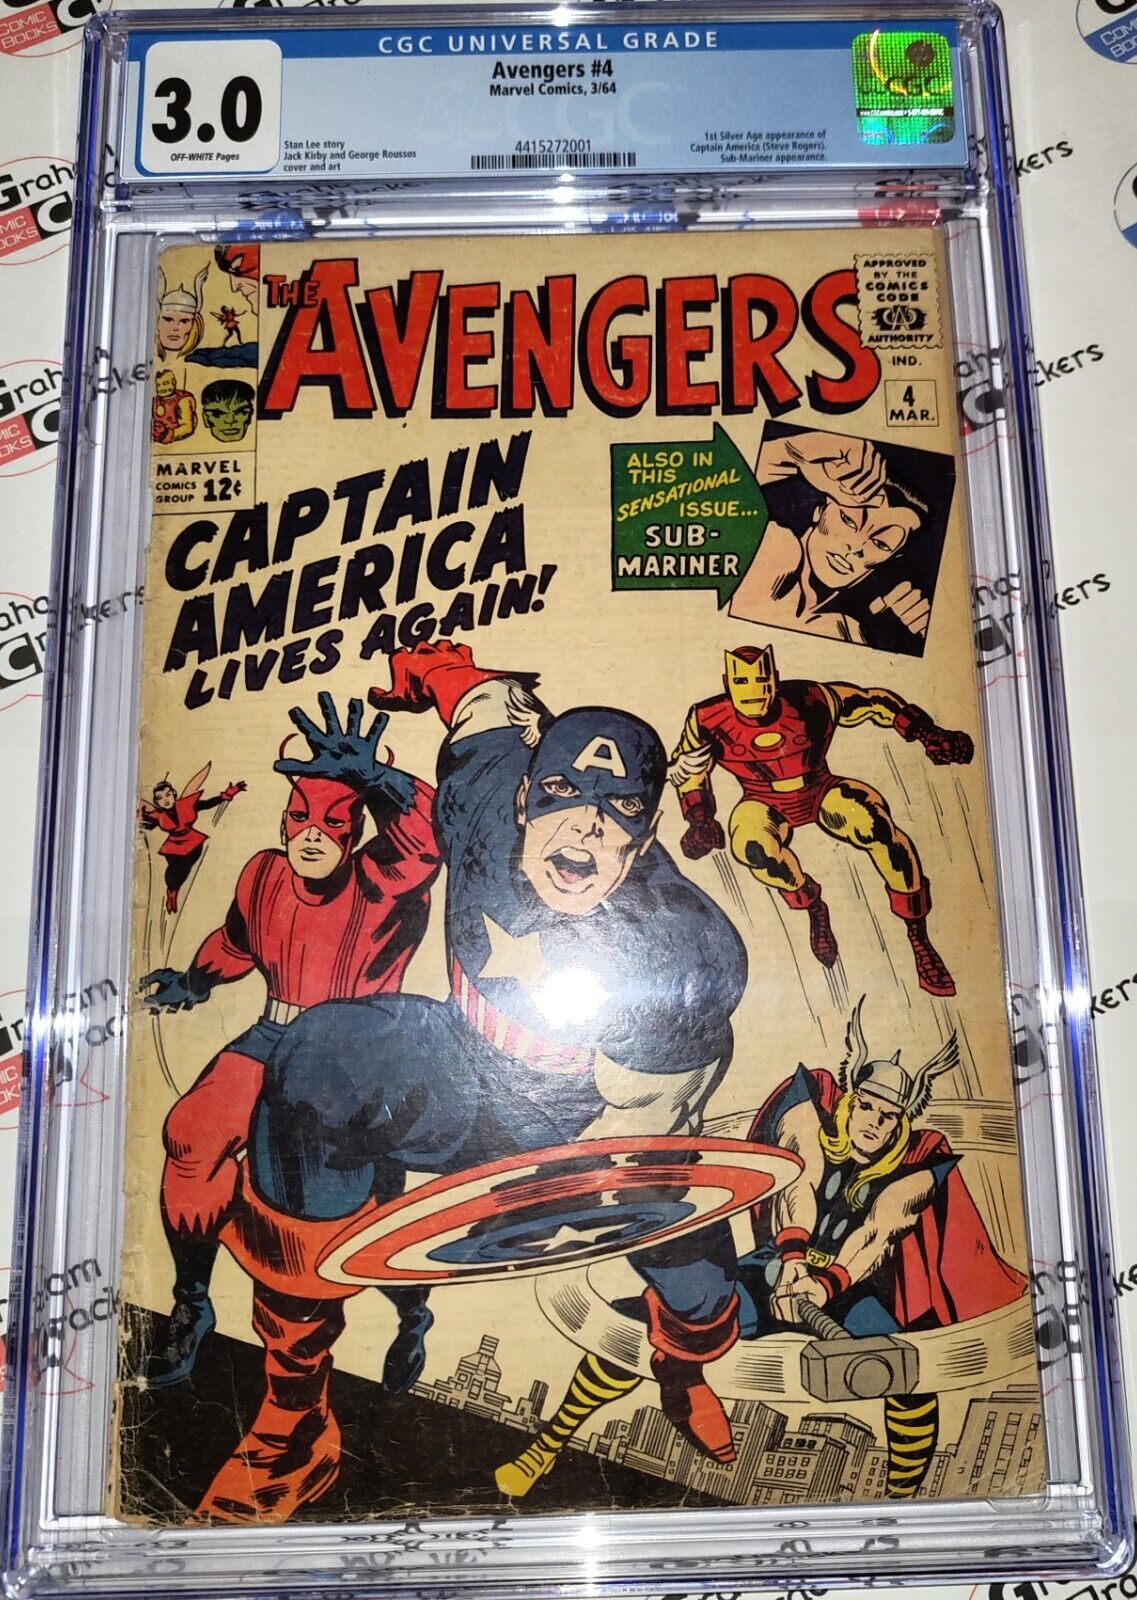 Avengers #4 (1963) CGC 3.0 1st Silver Age Captain America Stan Lee Jack Kirby